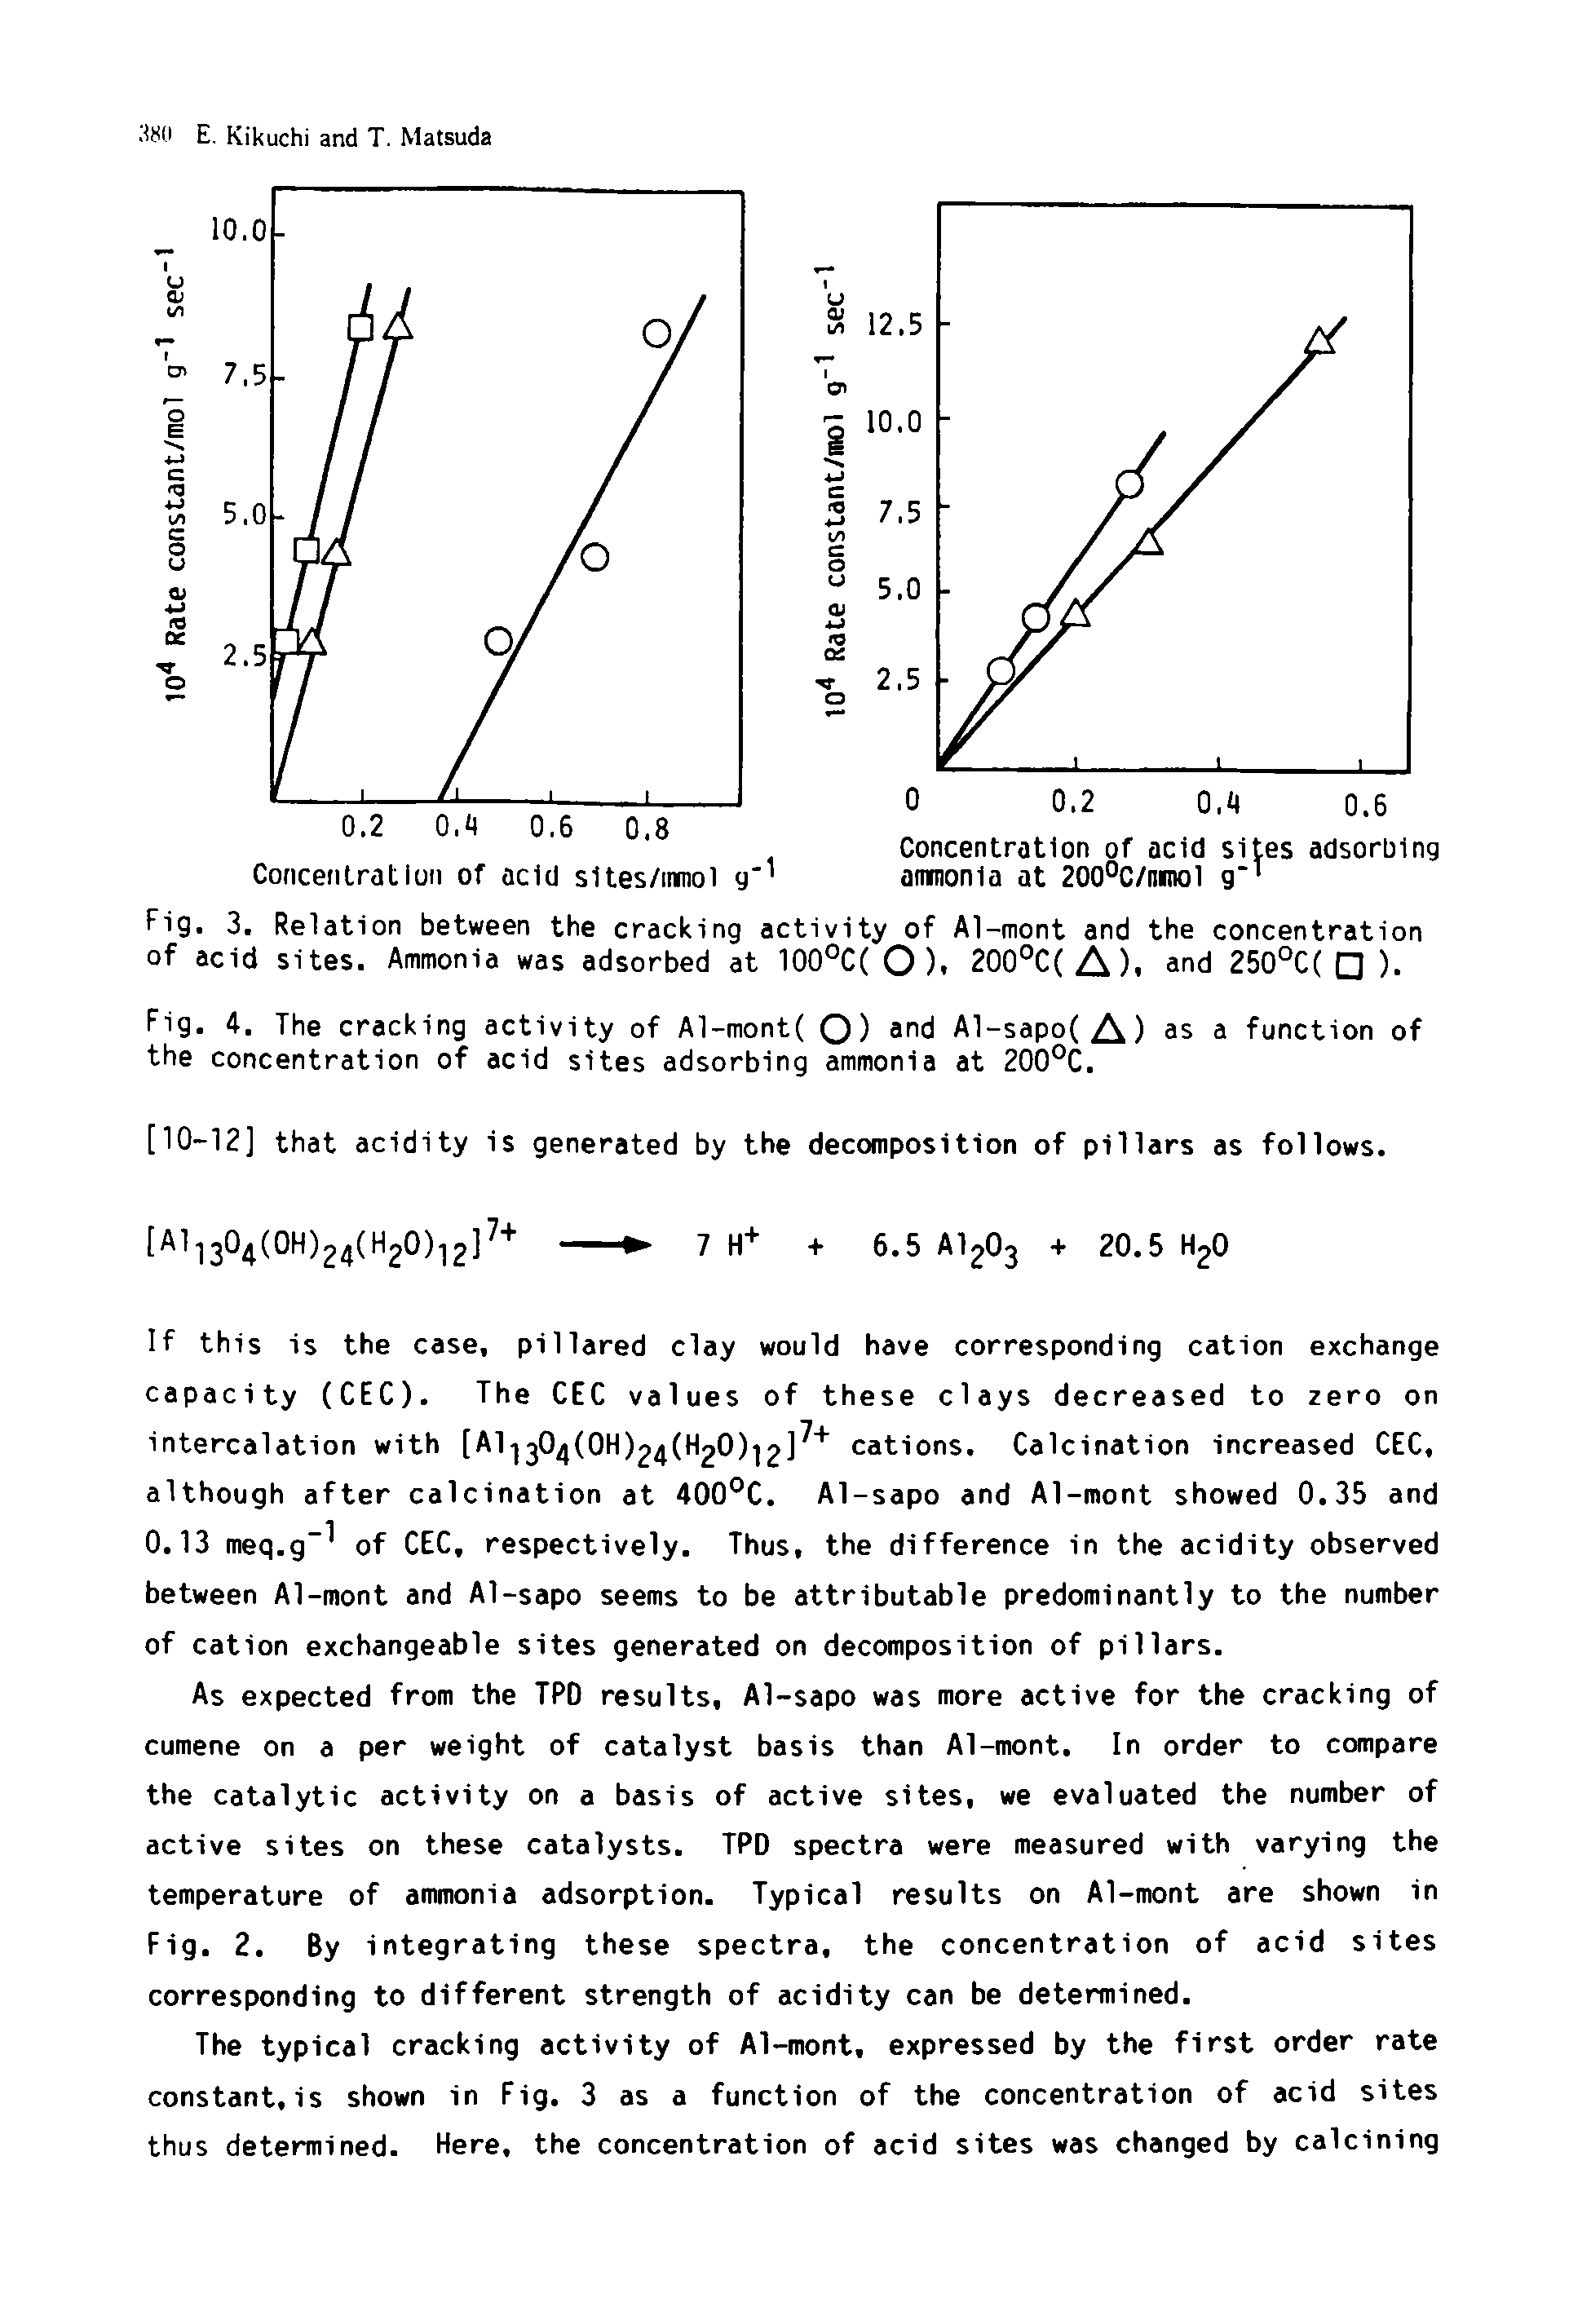 Fig. 4. The cracking activity of Al-mont( Q) and Al-sapo( A) as a function of the concentration of acid sites adsorbing ammonia at 200°C.